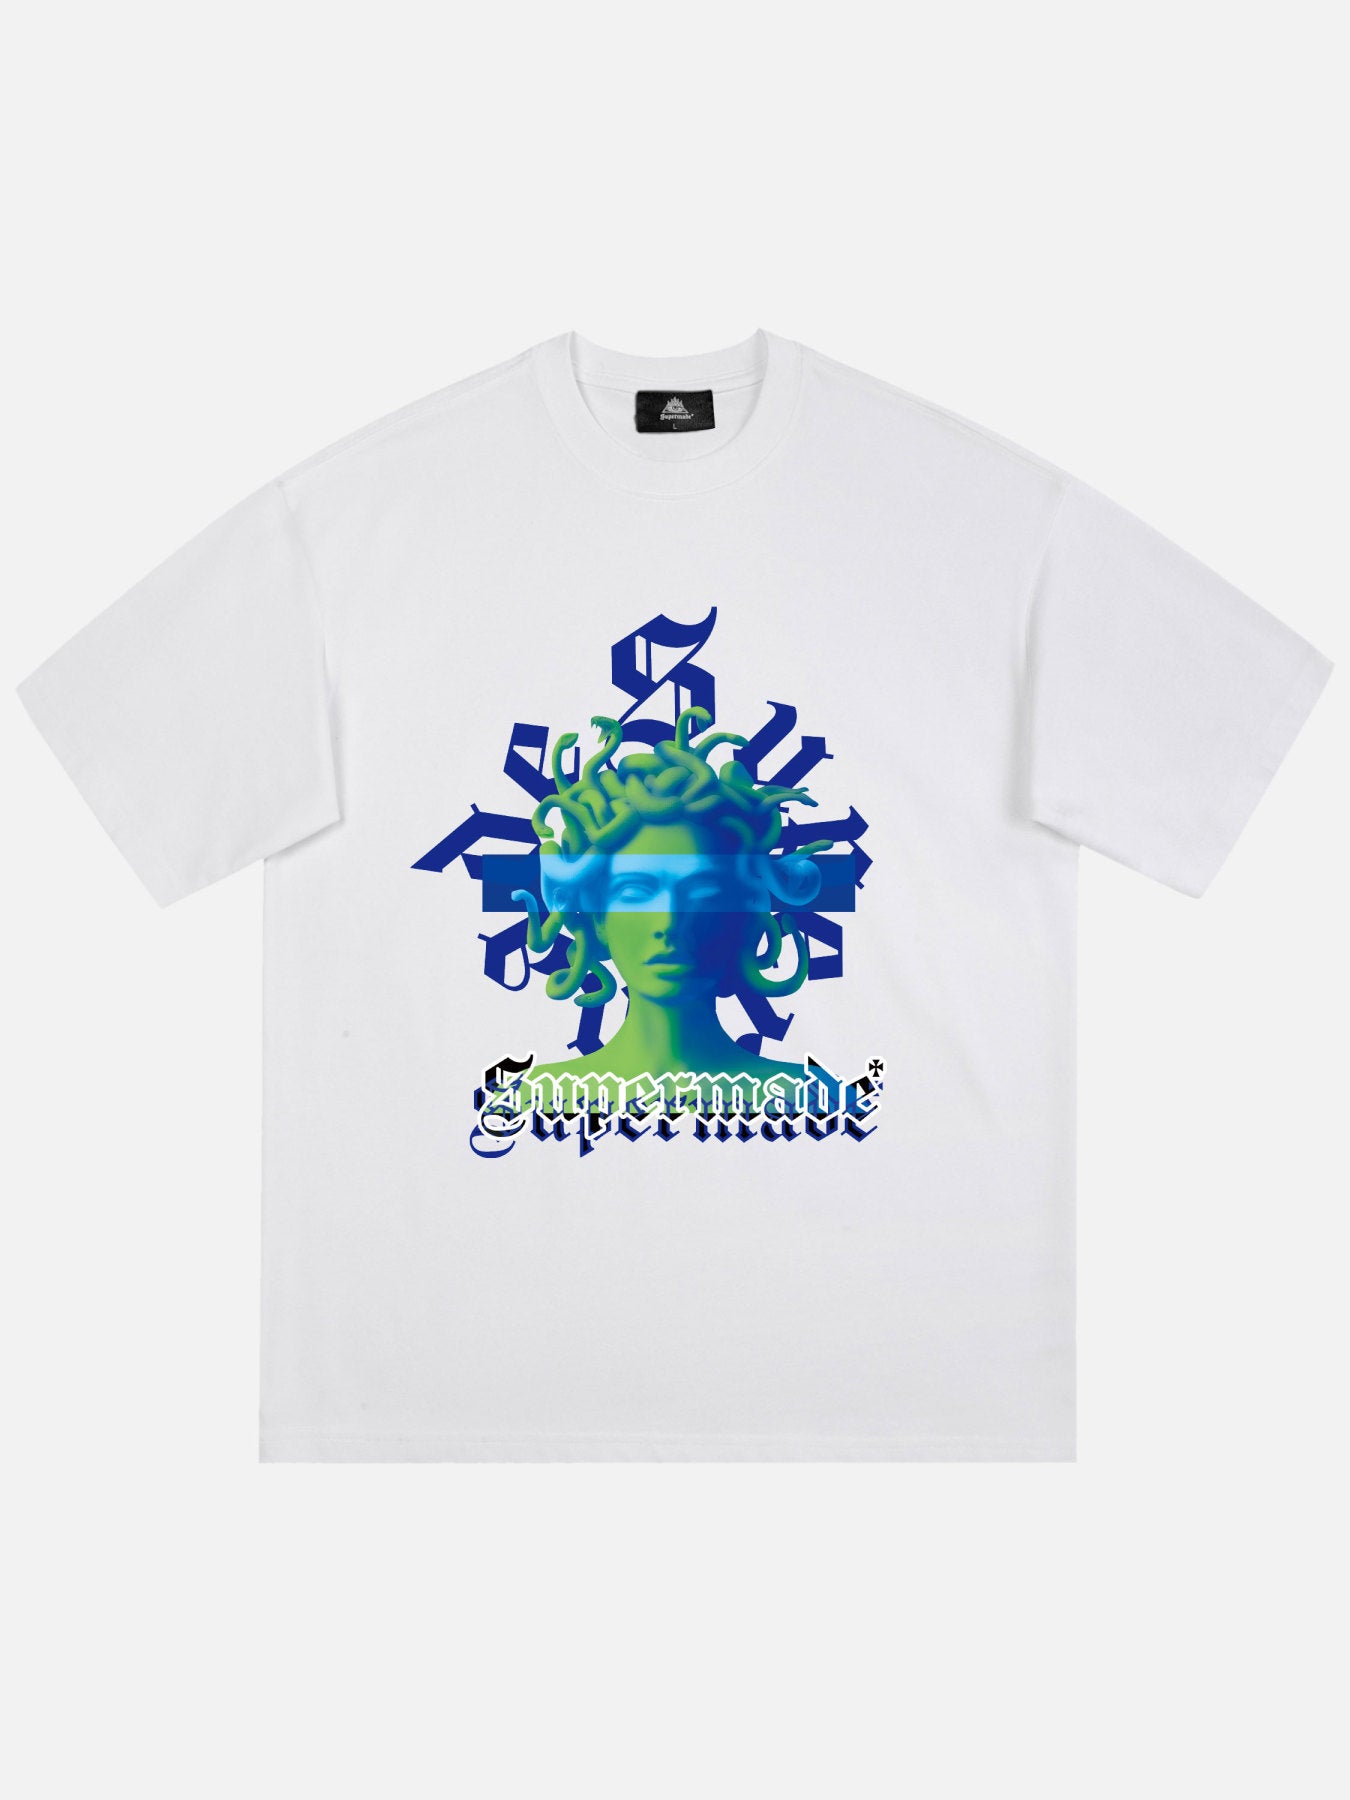 The Supermade Print T-shirt